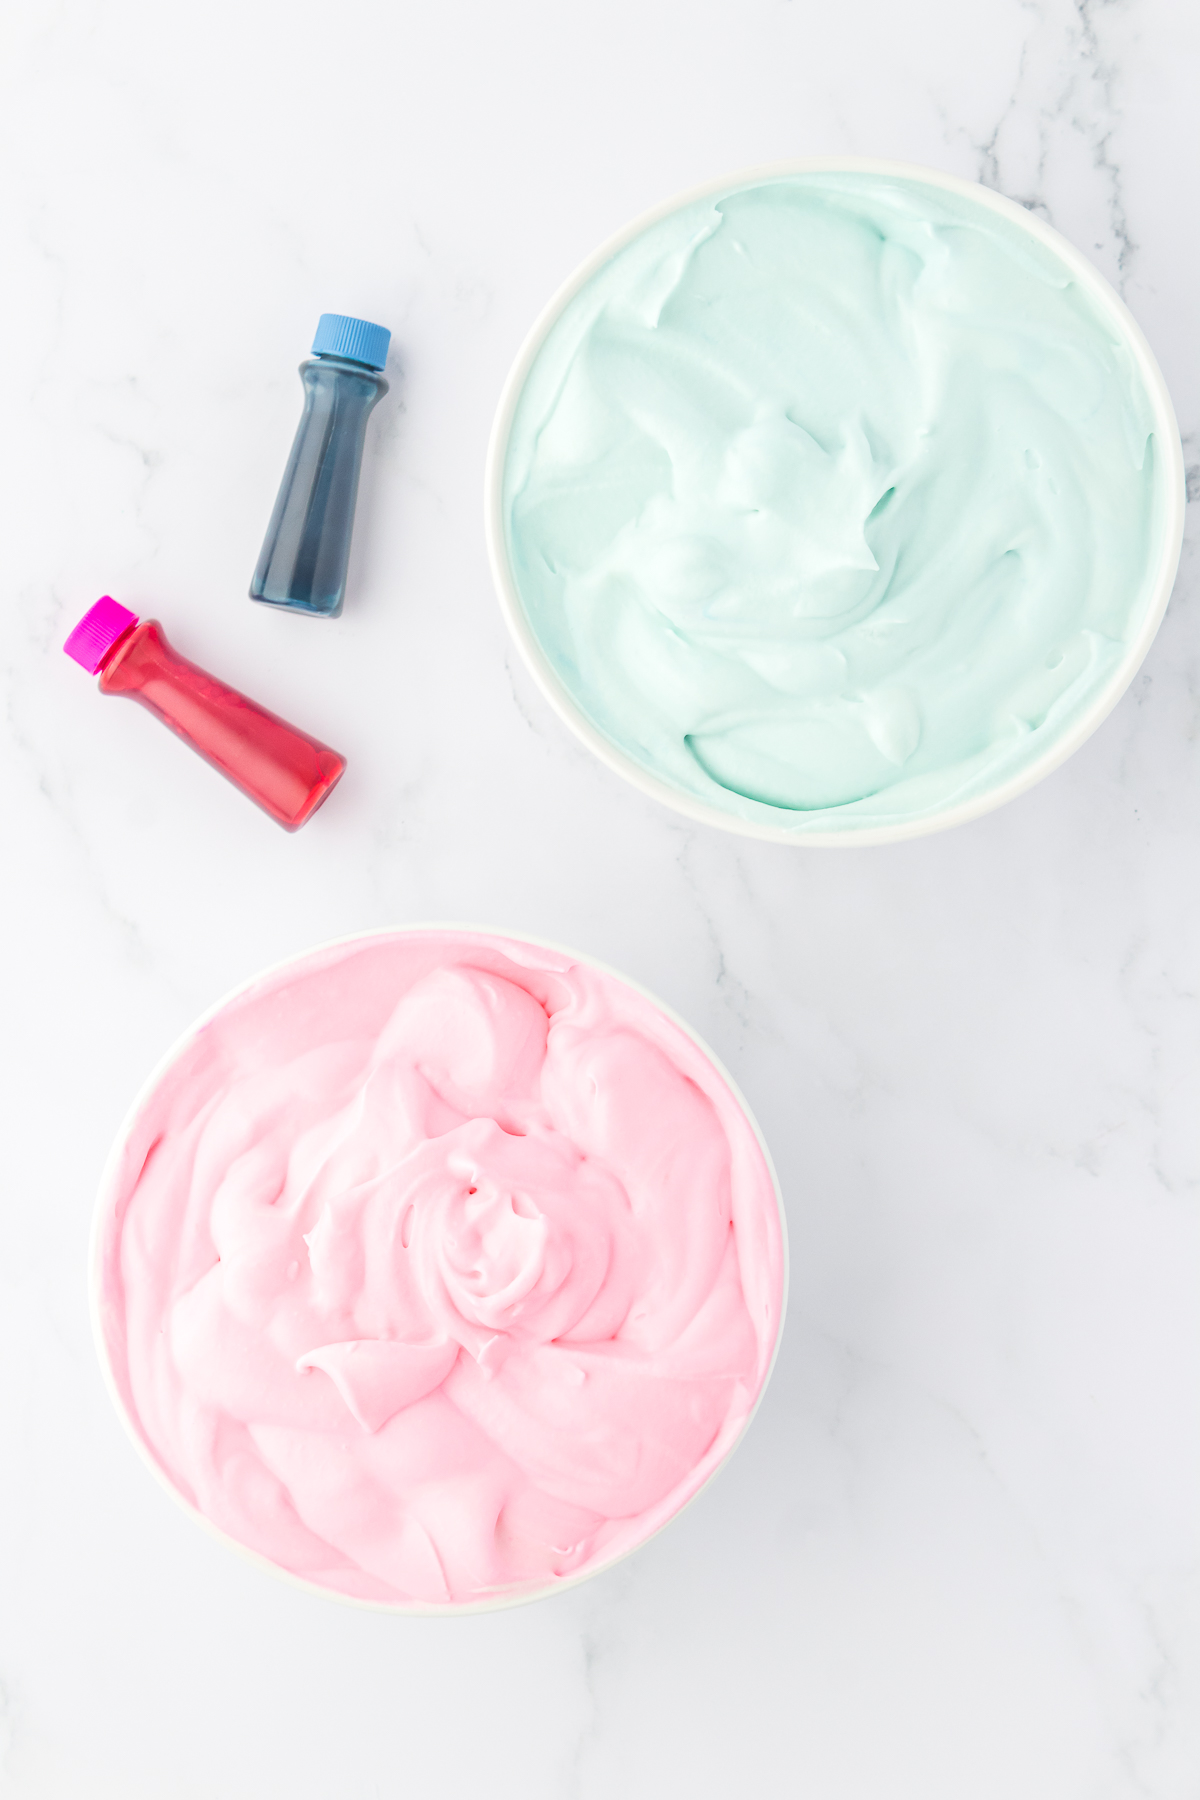 two bowls of cotton candy ice cream, one bowl is pink and one is blue, and two bottles of food coloring